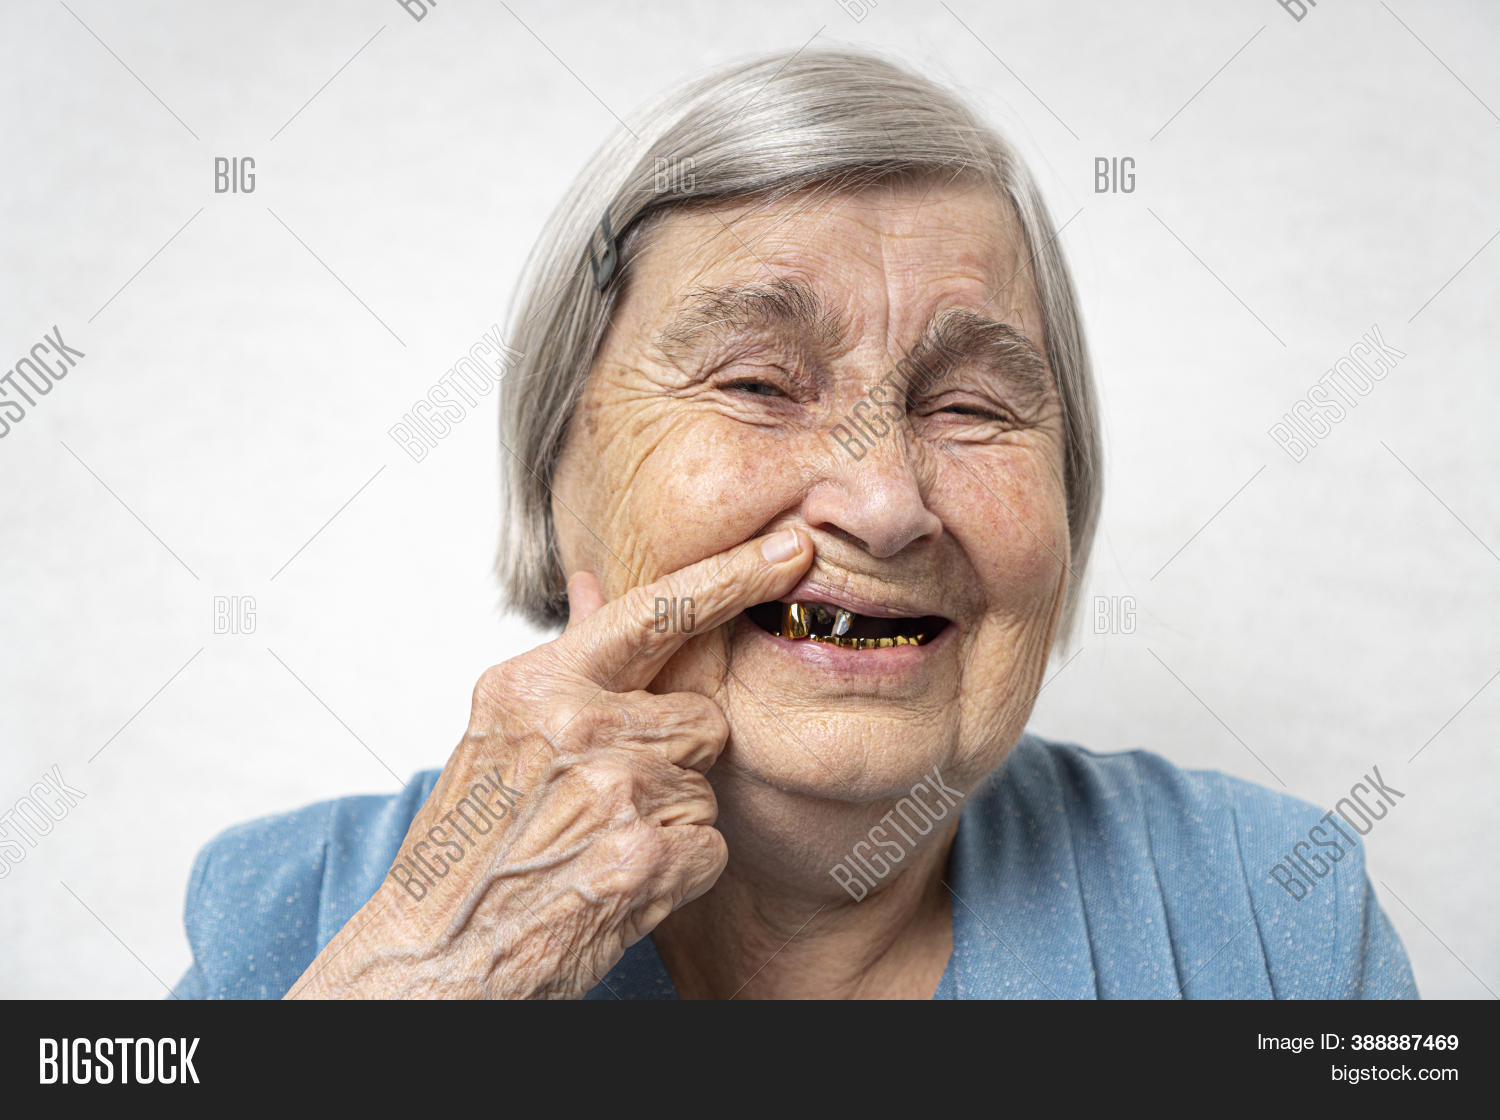 dean bosch recommends old woman without teeth pic